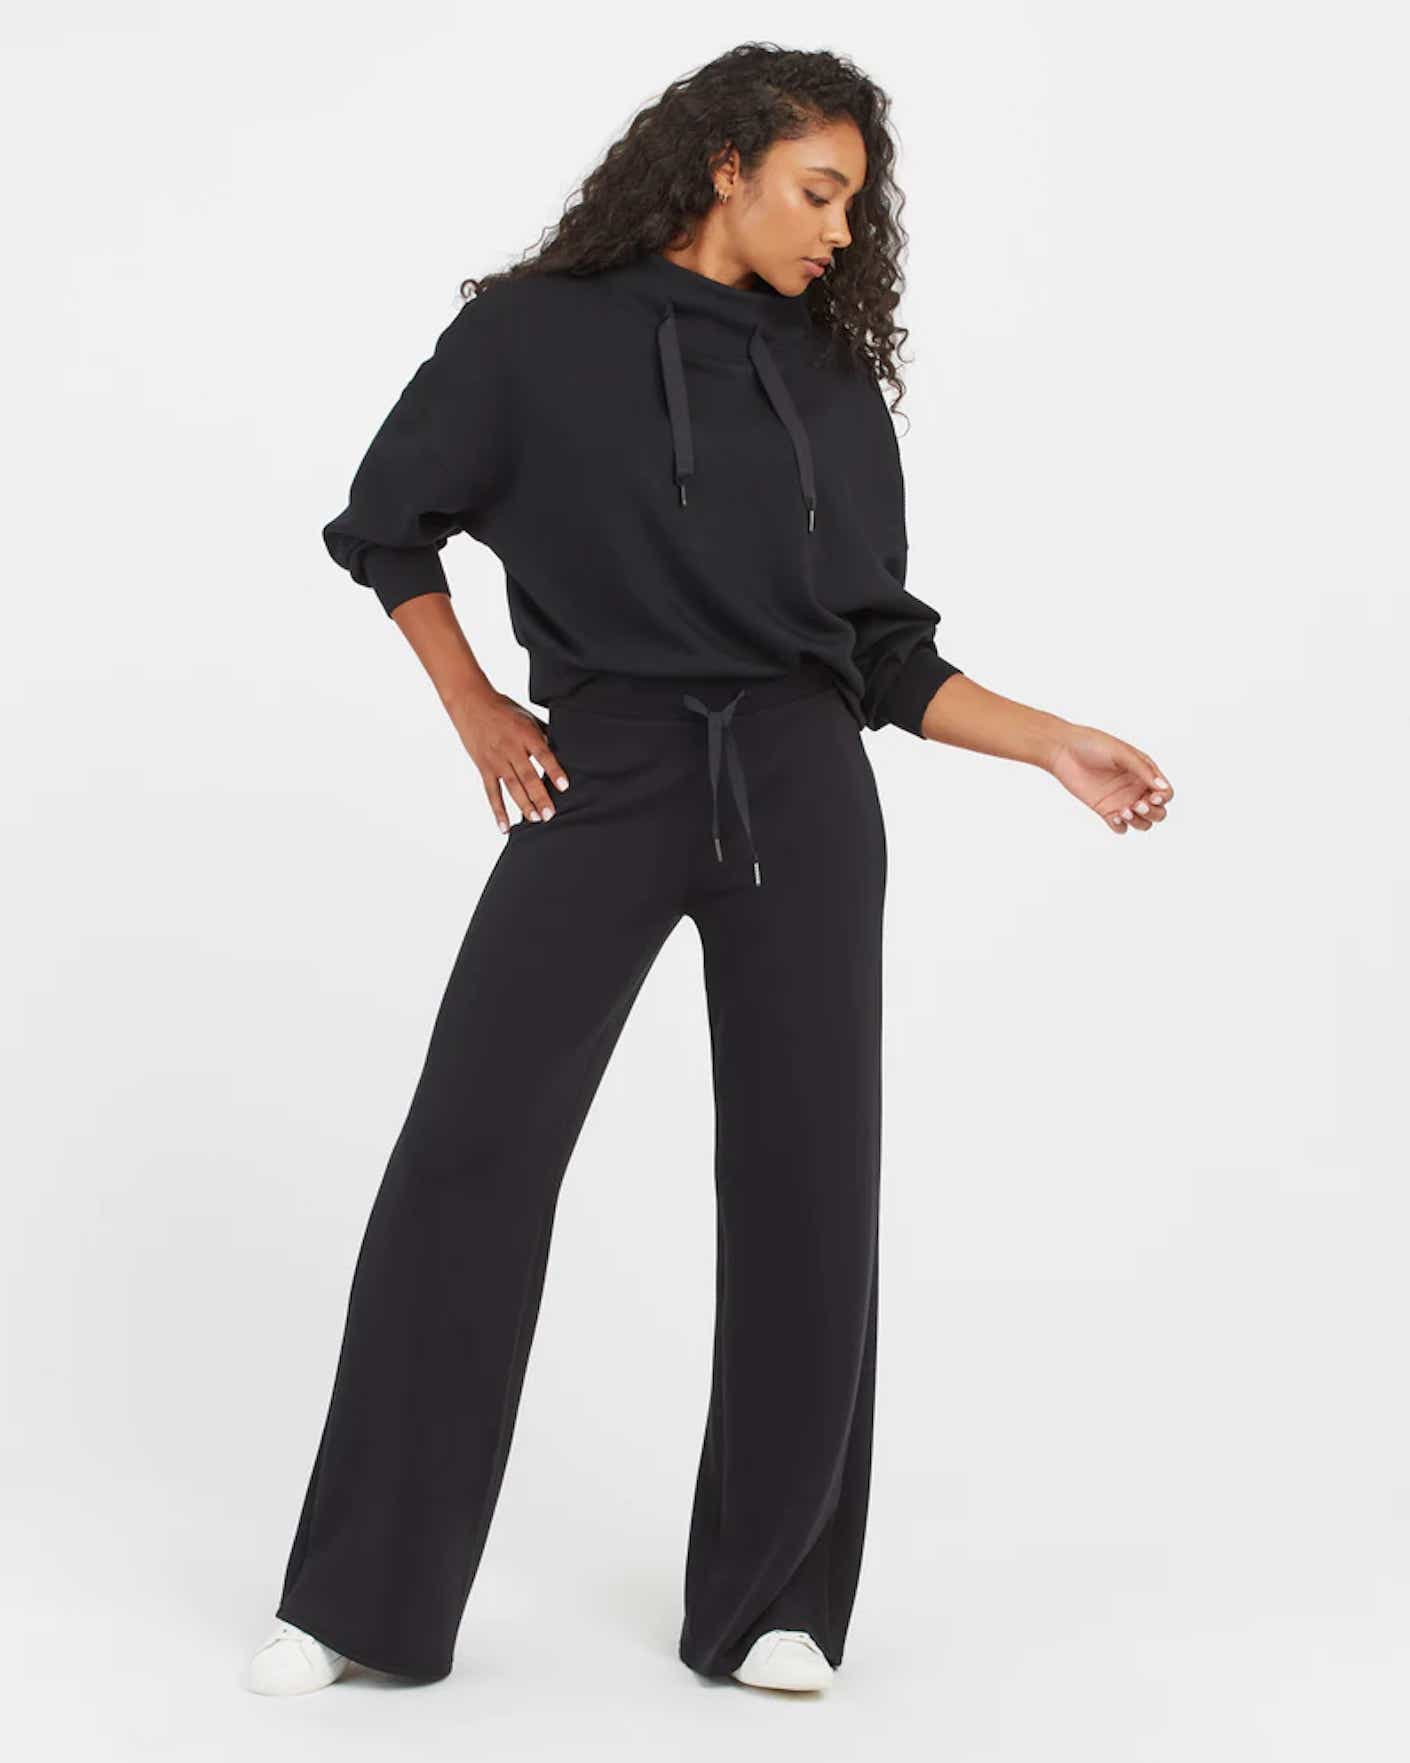 11 Best Loungewear Sets for Women Too Comfy to Take Off 2022